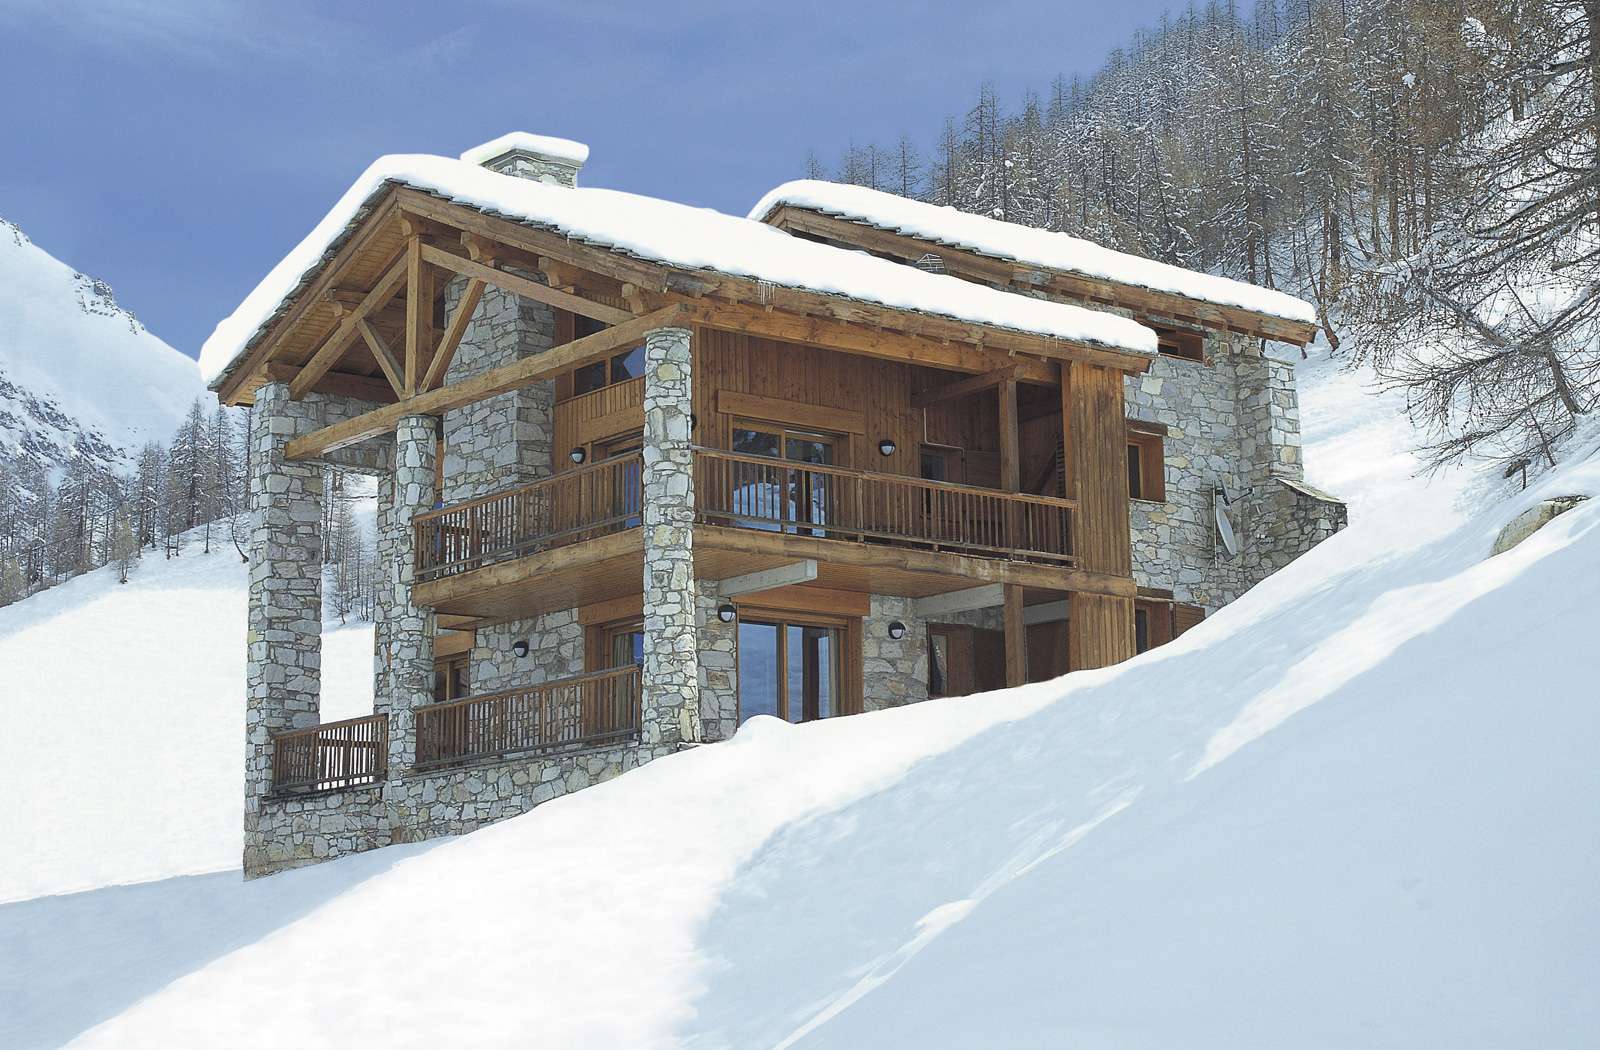 Kings-avenue-val-disere-snow-chalet-kinderfreundliches-massage-zimmer-ski-in-ski-out-kamin-val-disere-020-1